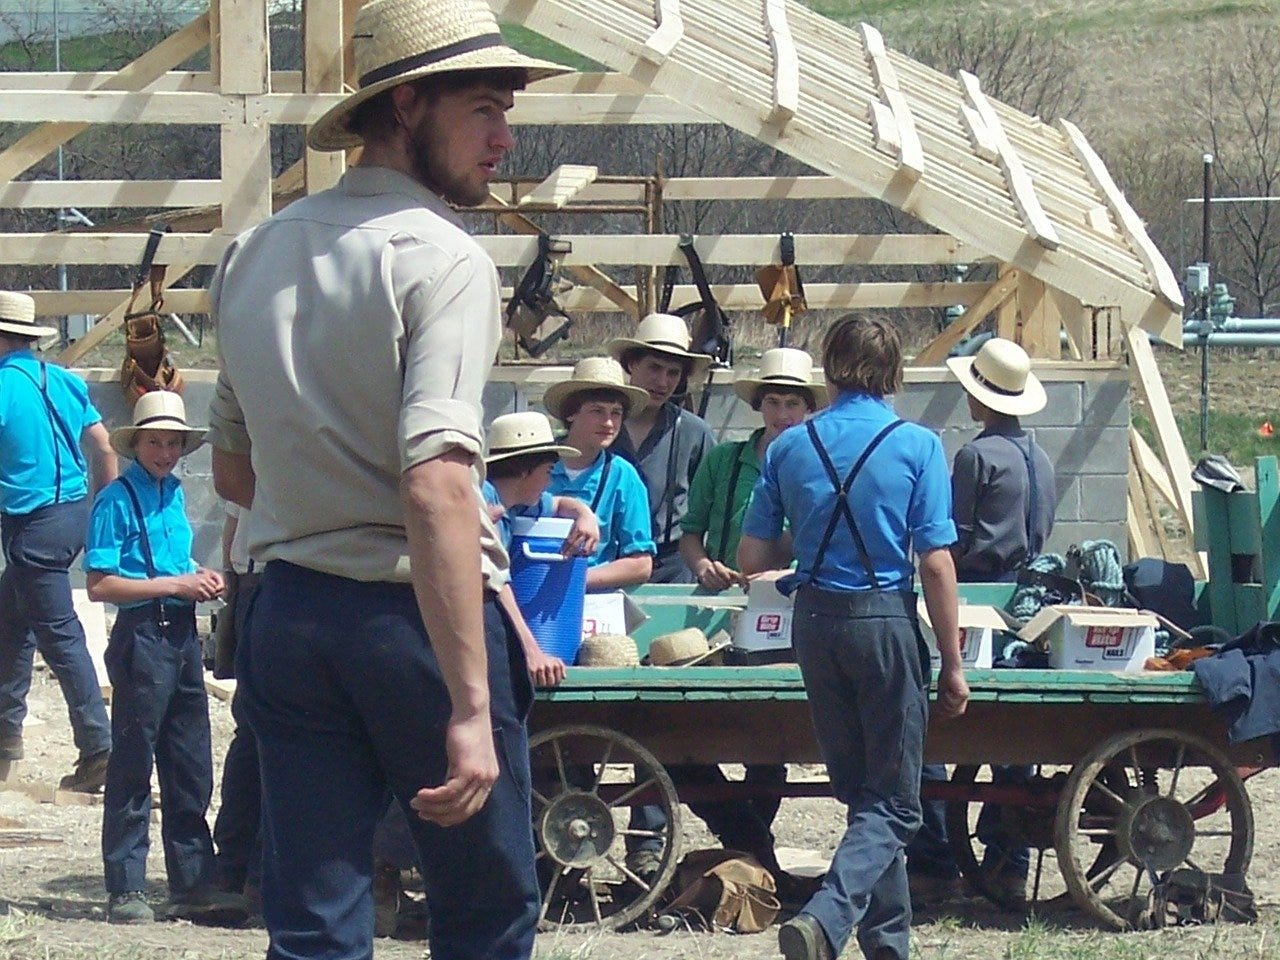 Amish boys in straw hats around a carriage at a barn raising.